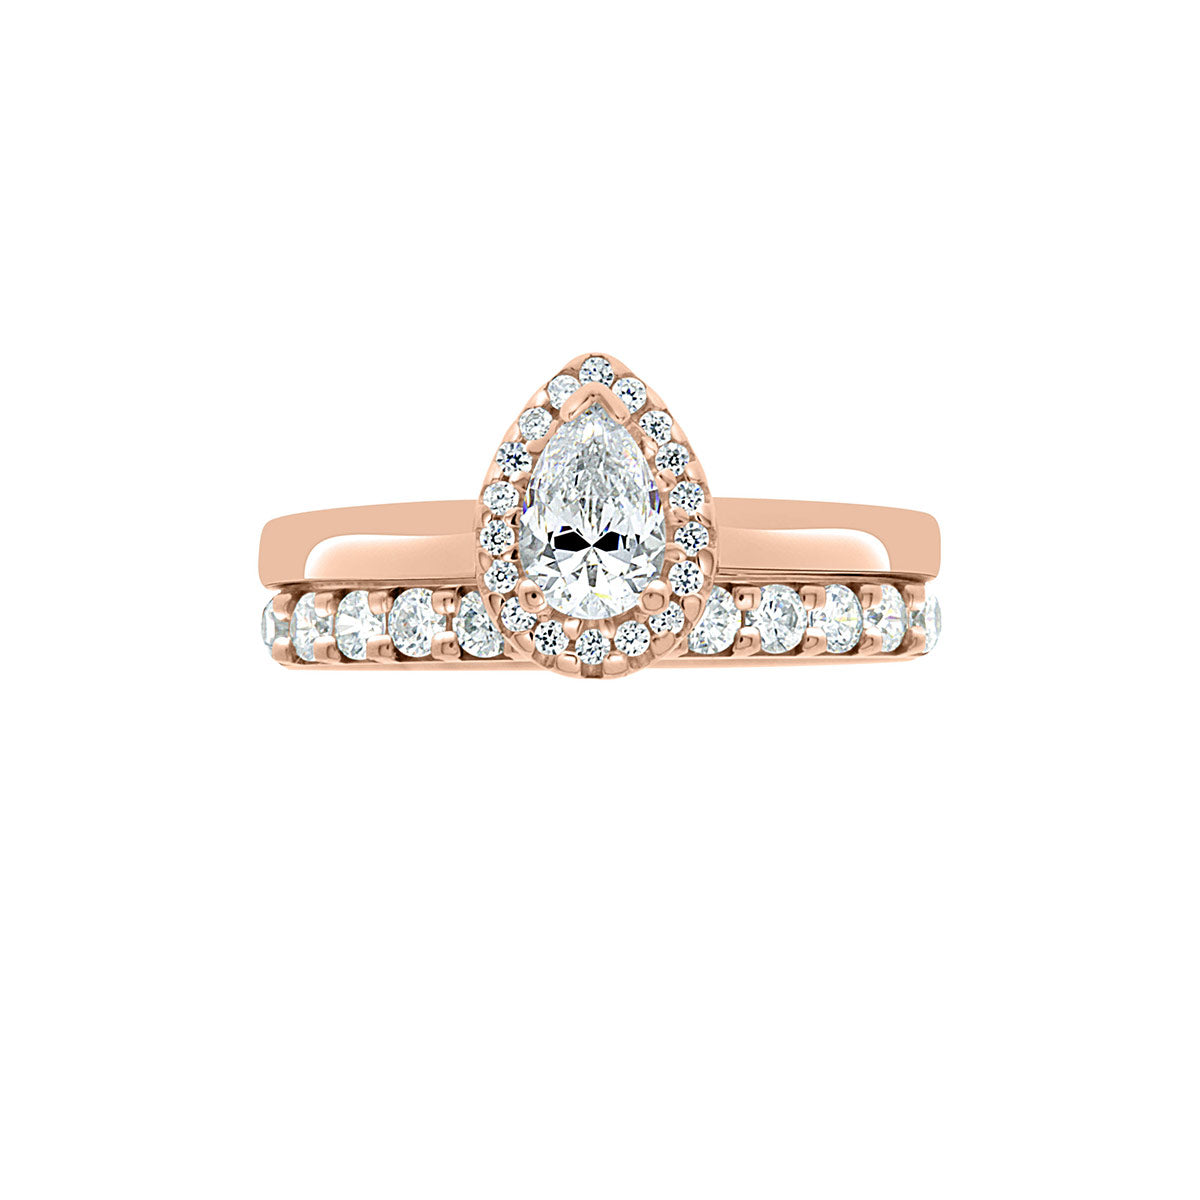 Vintage Engagement Ring with Pear Shape Diamond in Rose gold with a matching rose gold and diamond wedding ring